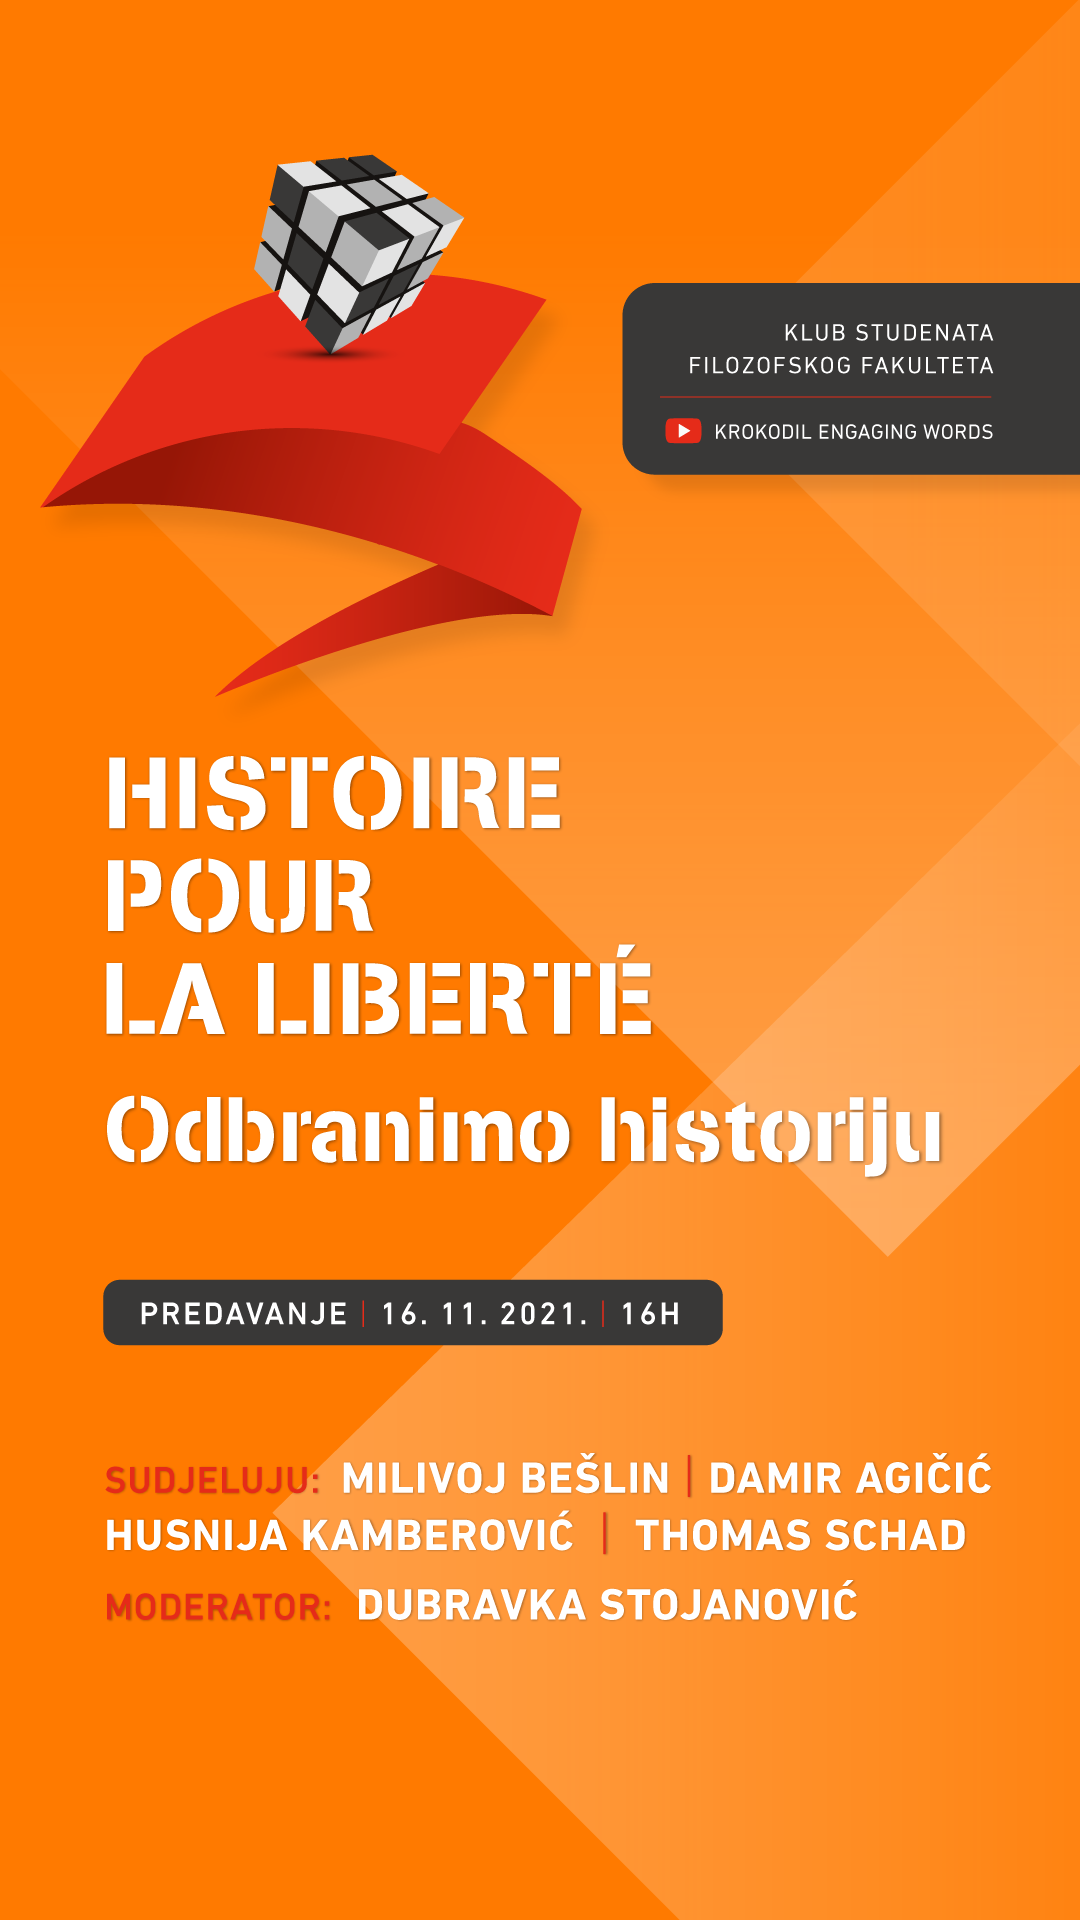 IG story 02-HR-Beograd-Histoire-08 (002).png